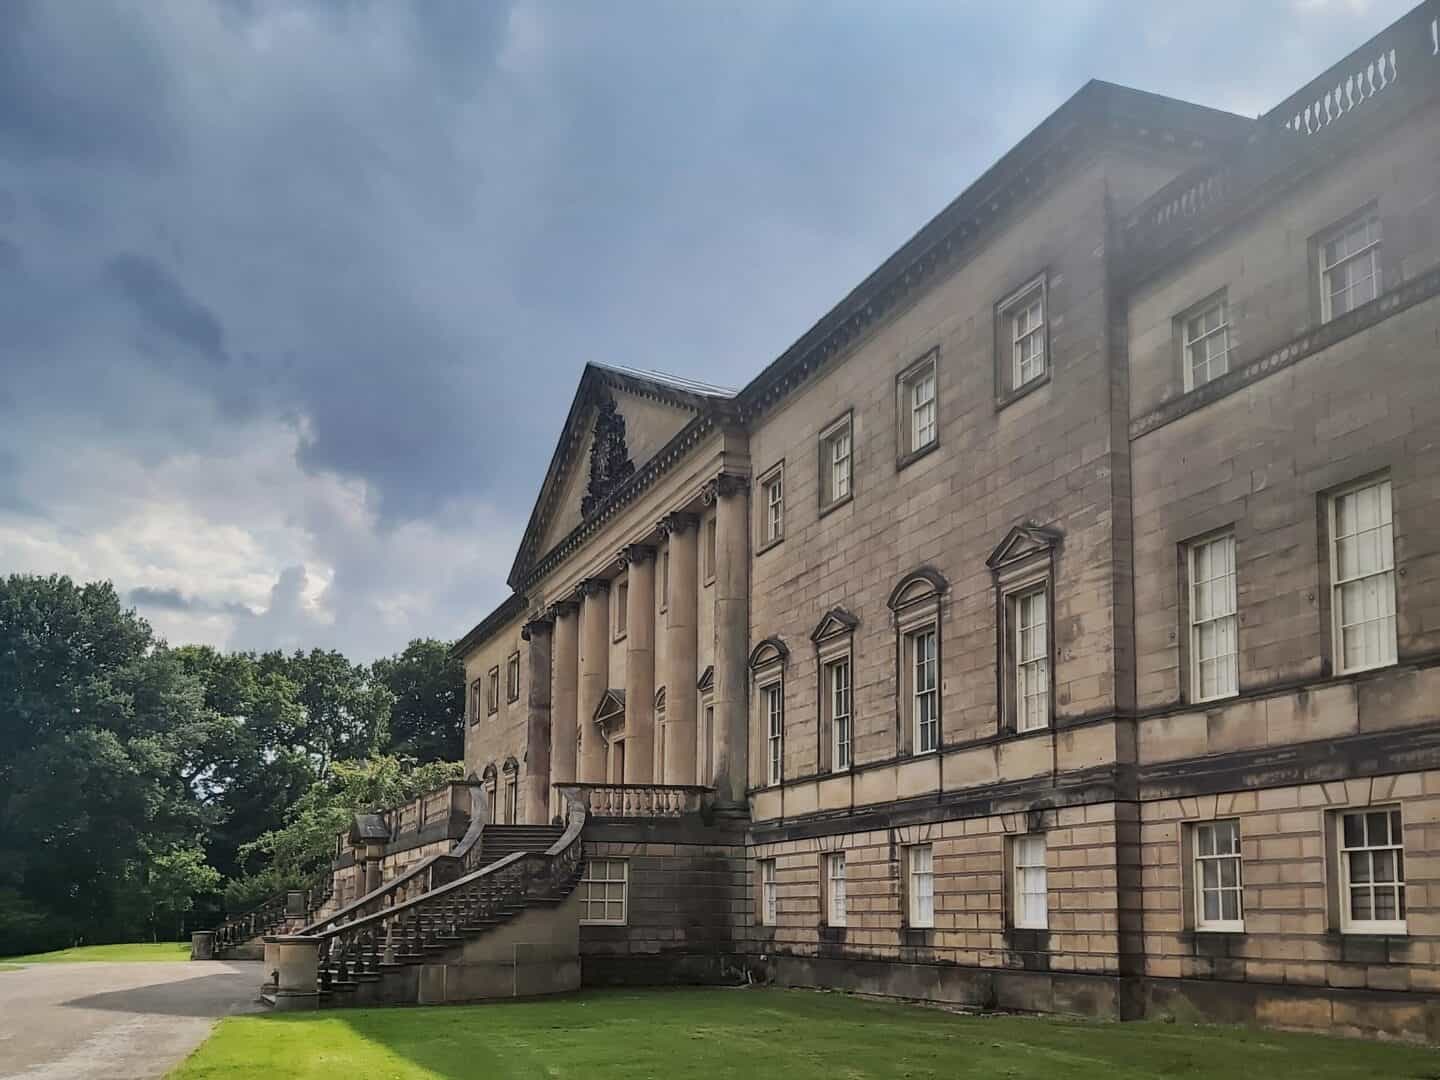 Family road trip from the West Midlands to the Scottish Highlands breaking up the journey from the West Midlands to North Yorkshire at National Trust Nostell. Photo of Nostell. Huge building with grand stairs at front.  